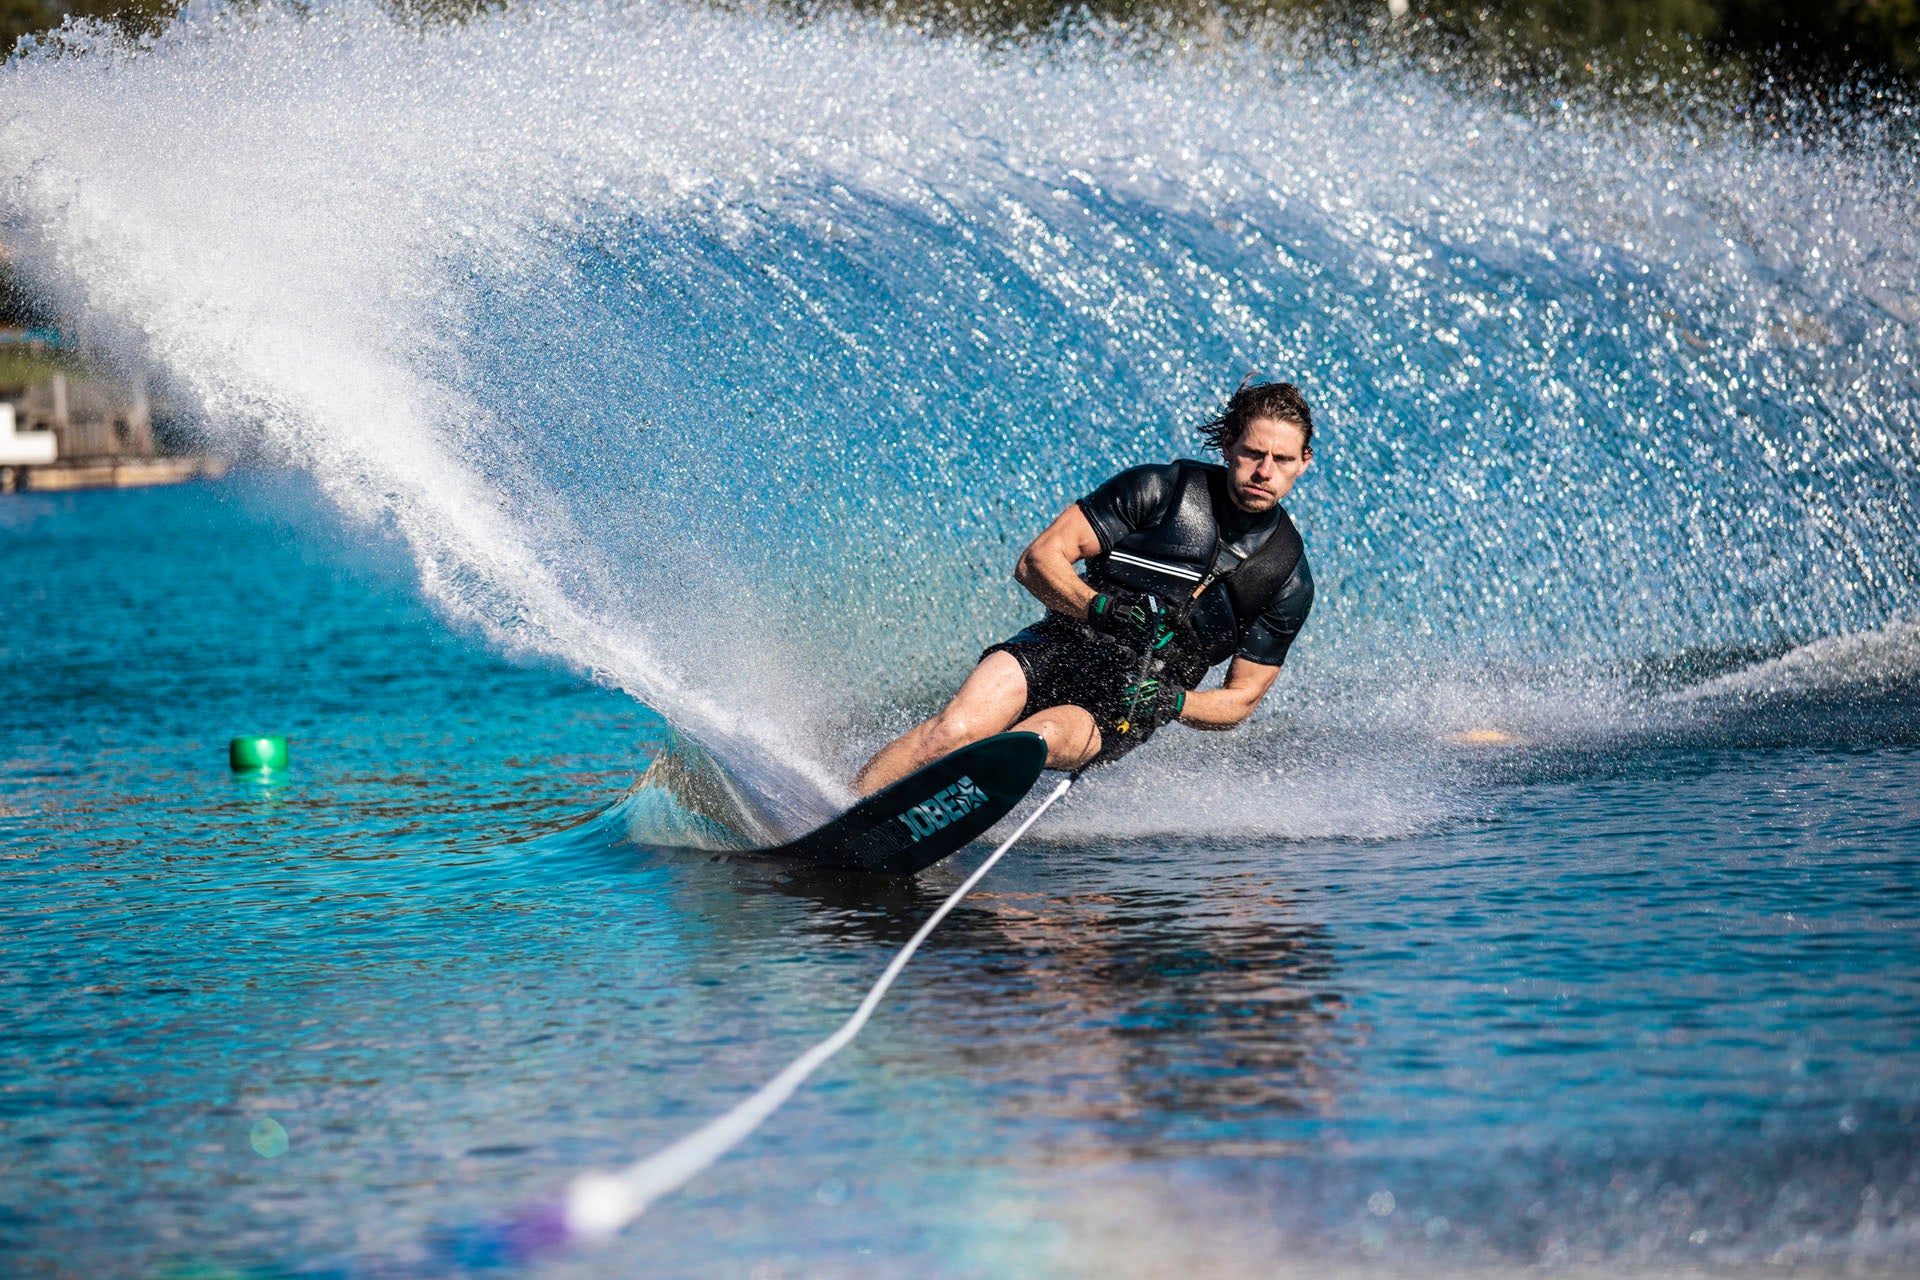 Australia's Gems: Top Waterskiing Spots for Local Enthusiasts